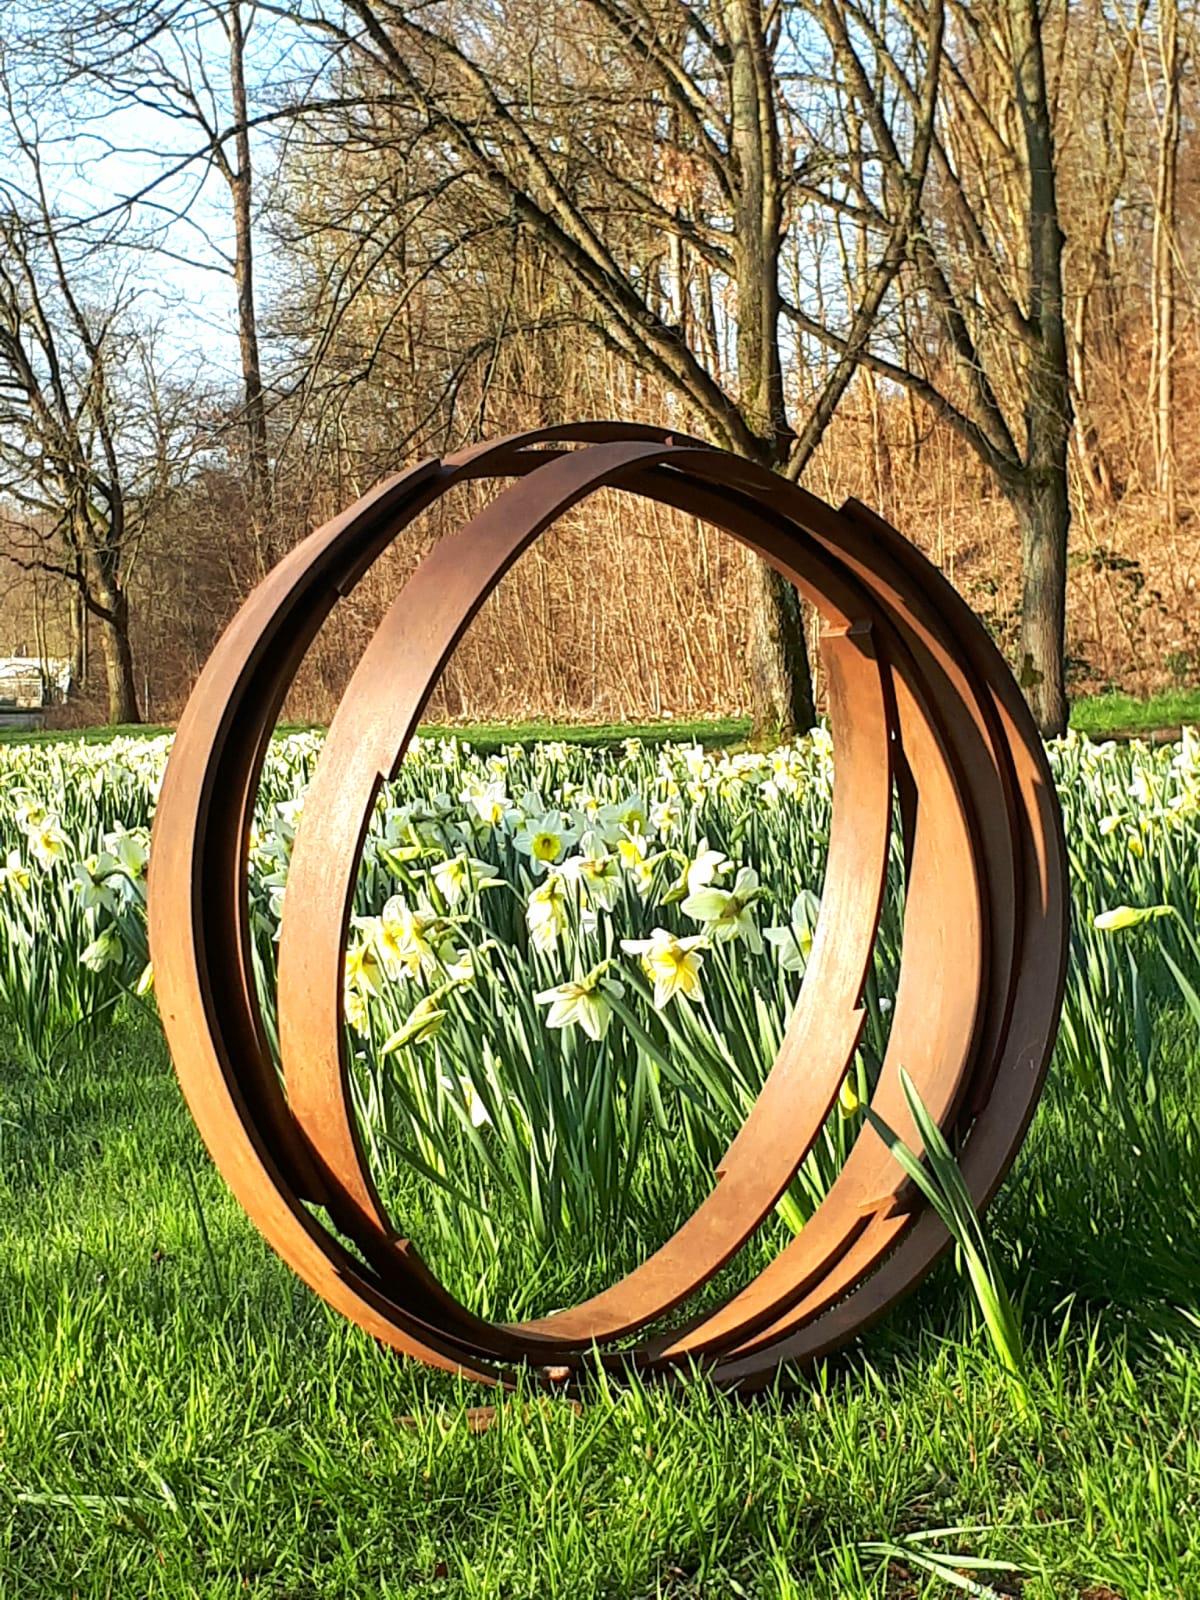 Artist: Kuno Vollet

Title: Orbit

Contemporary rusted steel sculpture for inside or garden outdoor spaces.

Beautiful circle - sign for infinity. Stunning large artwork. Possible to put on a pedestal or directly on to the ground.